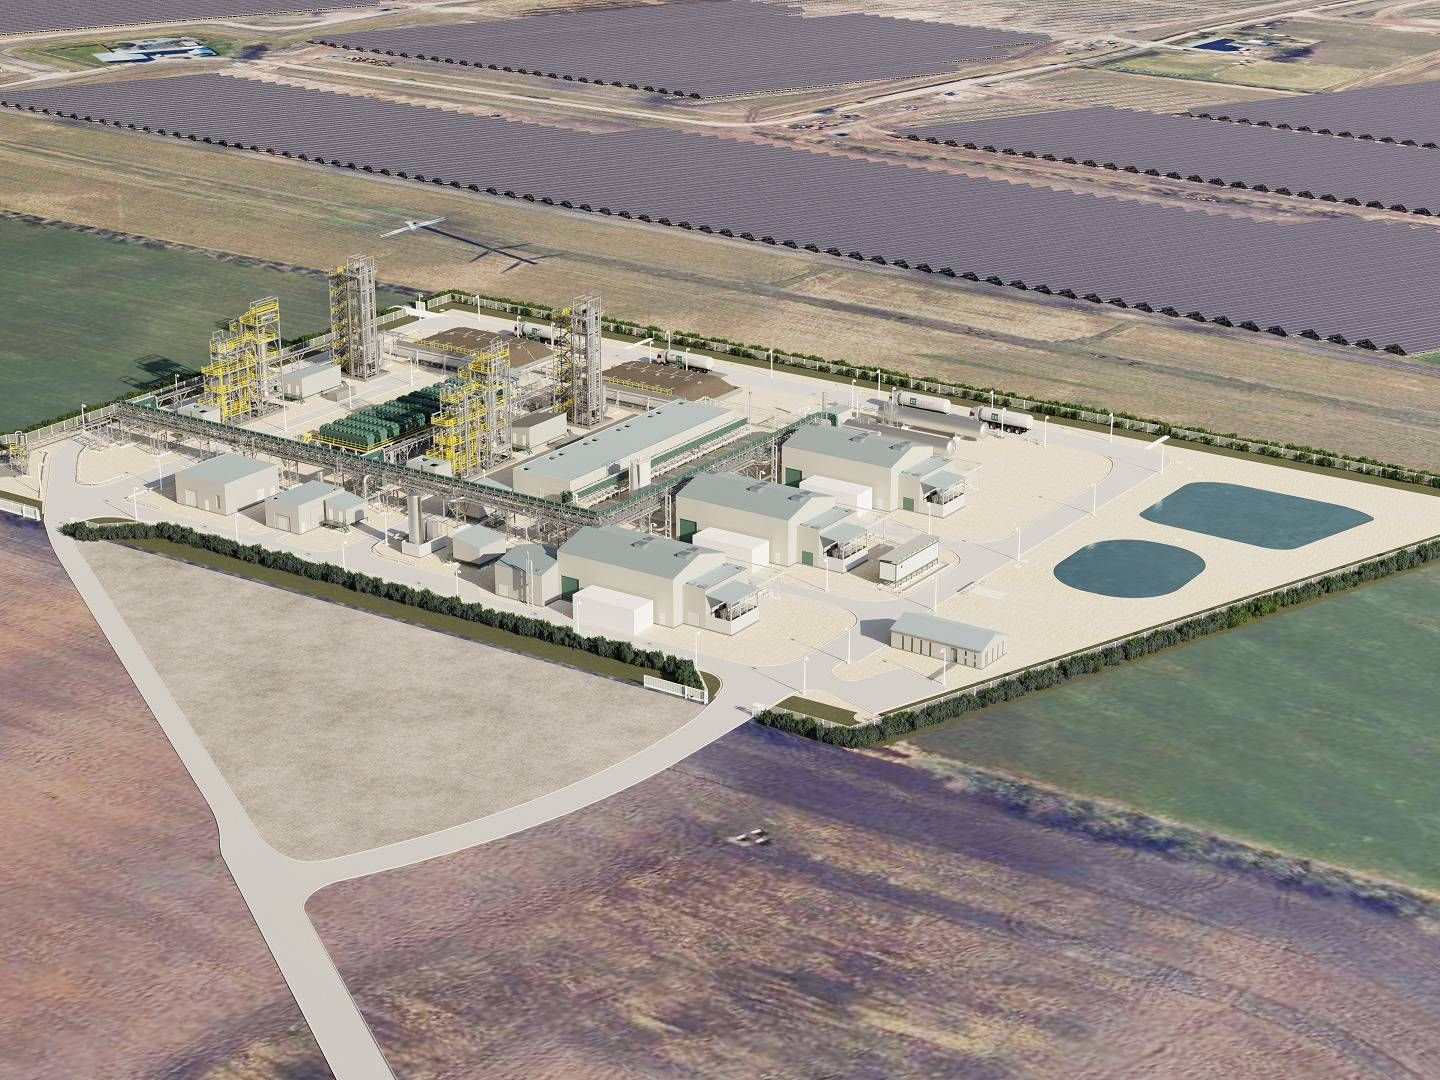 Pictured is a visualization of European Energy's Danish e-methanol project at Kassø, which the developer is currently completing. The plant is set to be the world's largest e-methanol plant with a production of 32,000 tons of e-methanol per year. | Photo: European Energy/pr.